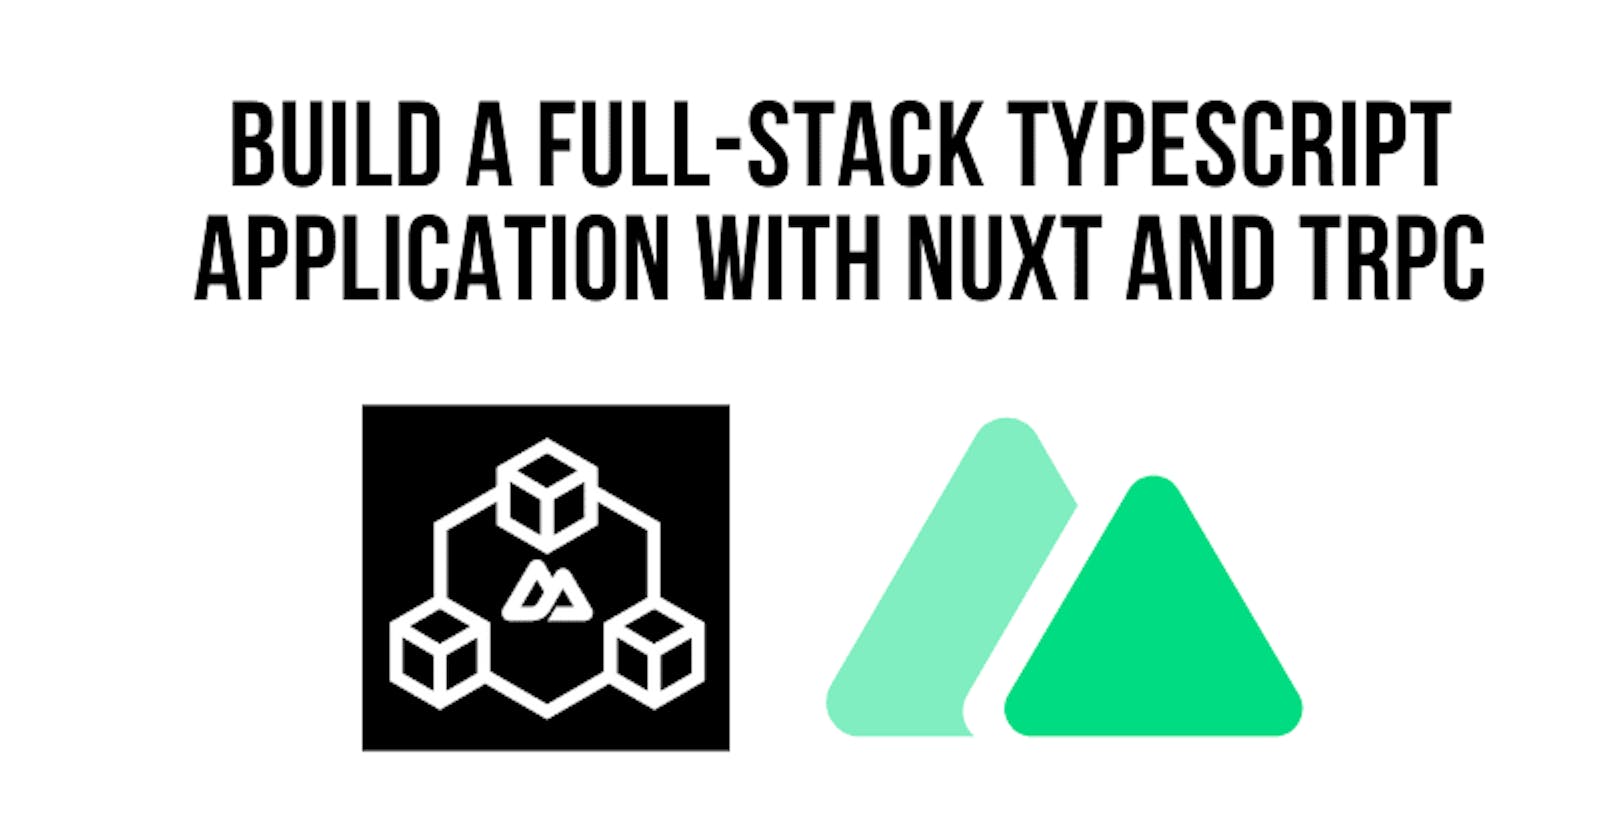 Build A Full-Stack Typescript Application with Nuxt and tRPC